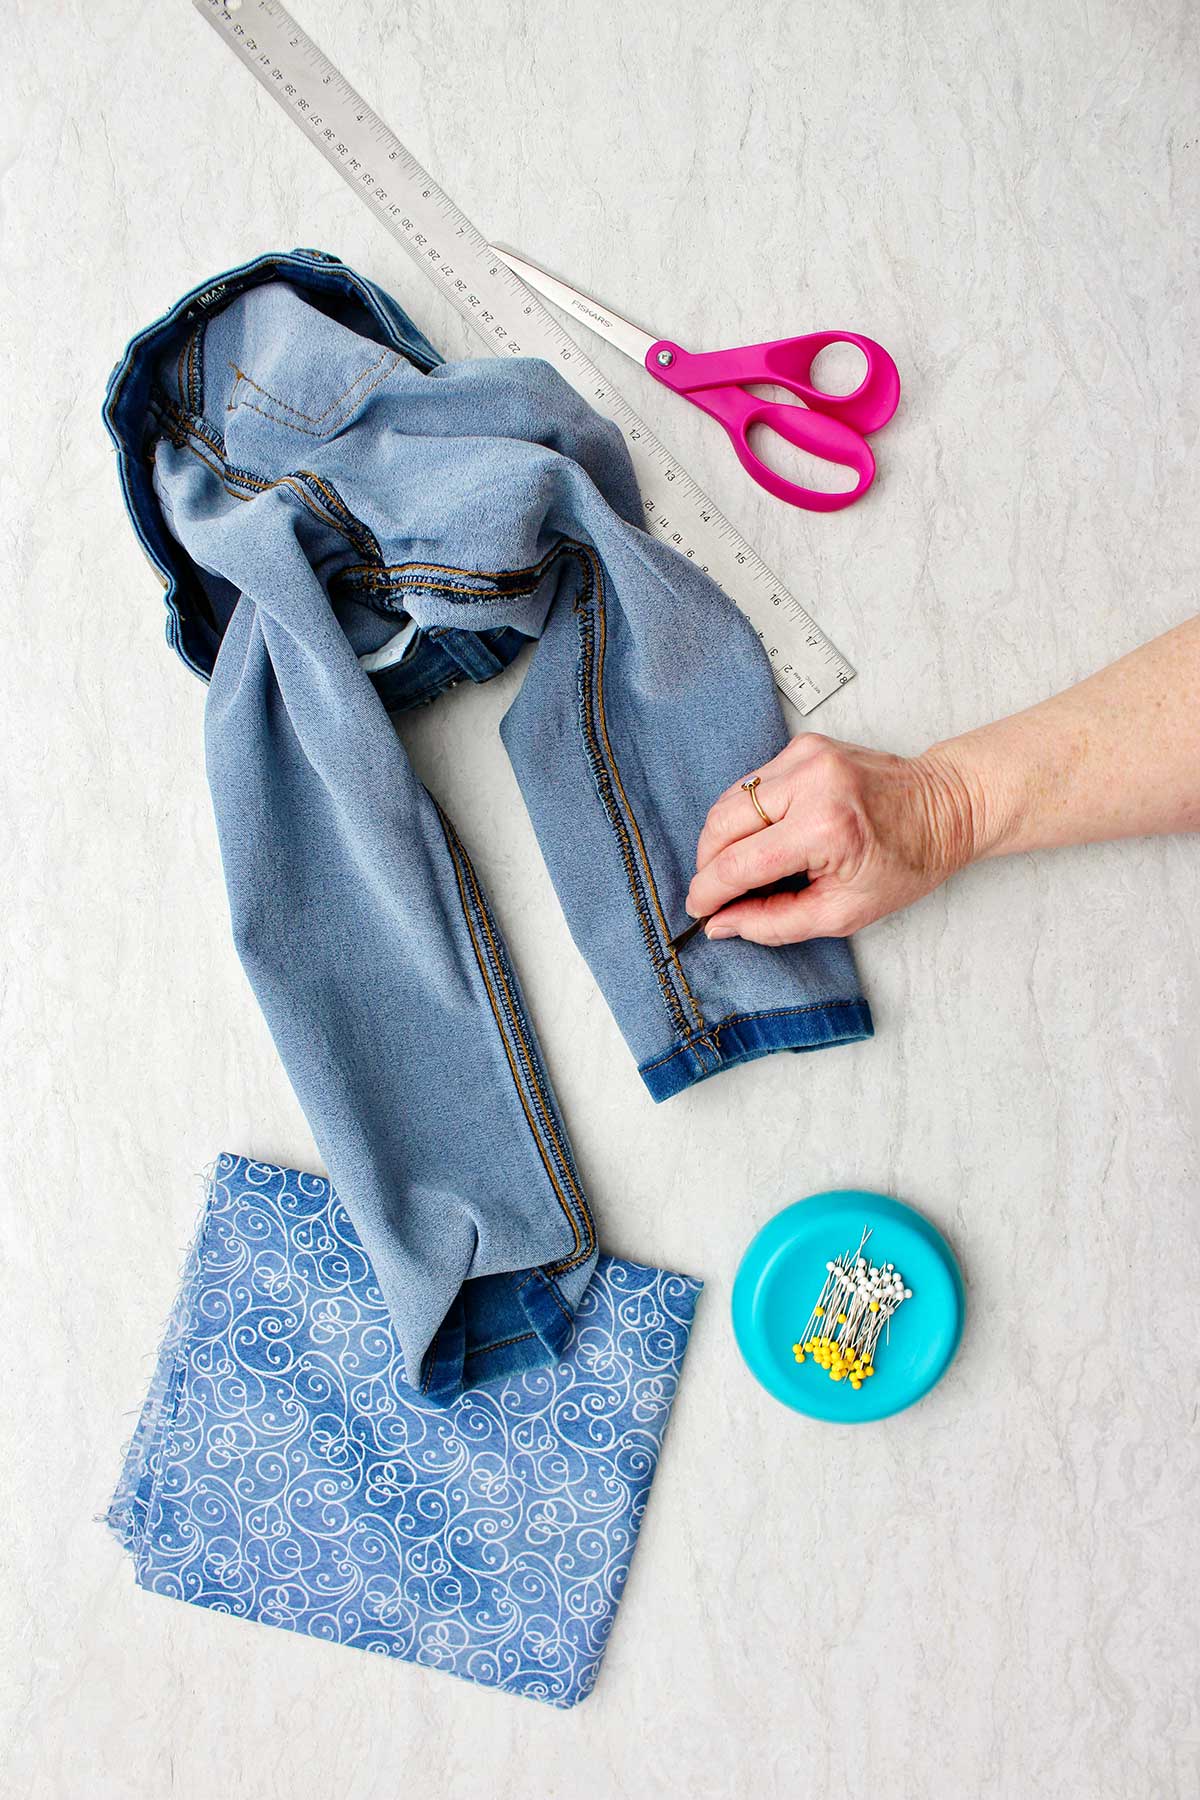 A pair of inside out jeans with hand showing where they want to cut to make bell bottoms with pins, scissors and fabric near by.